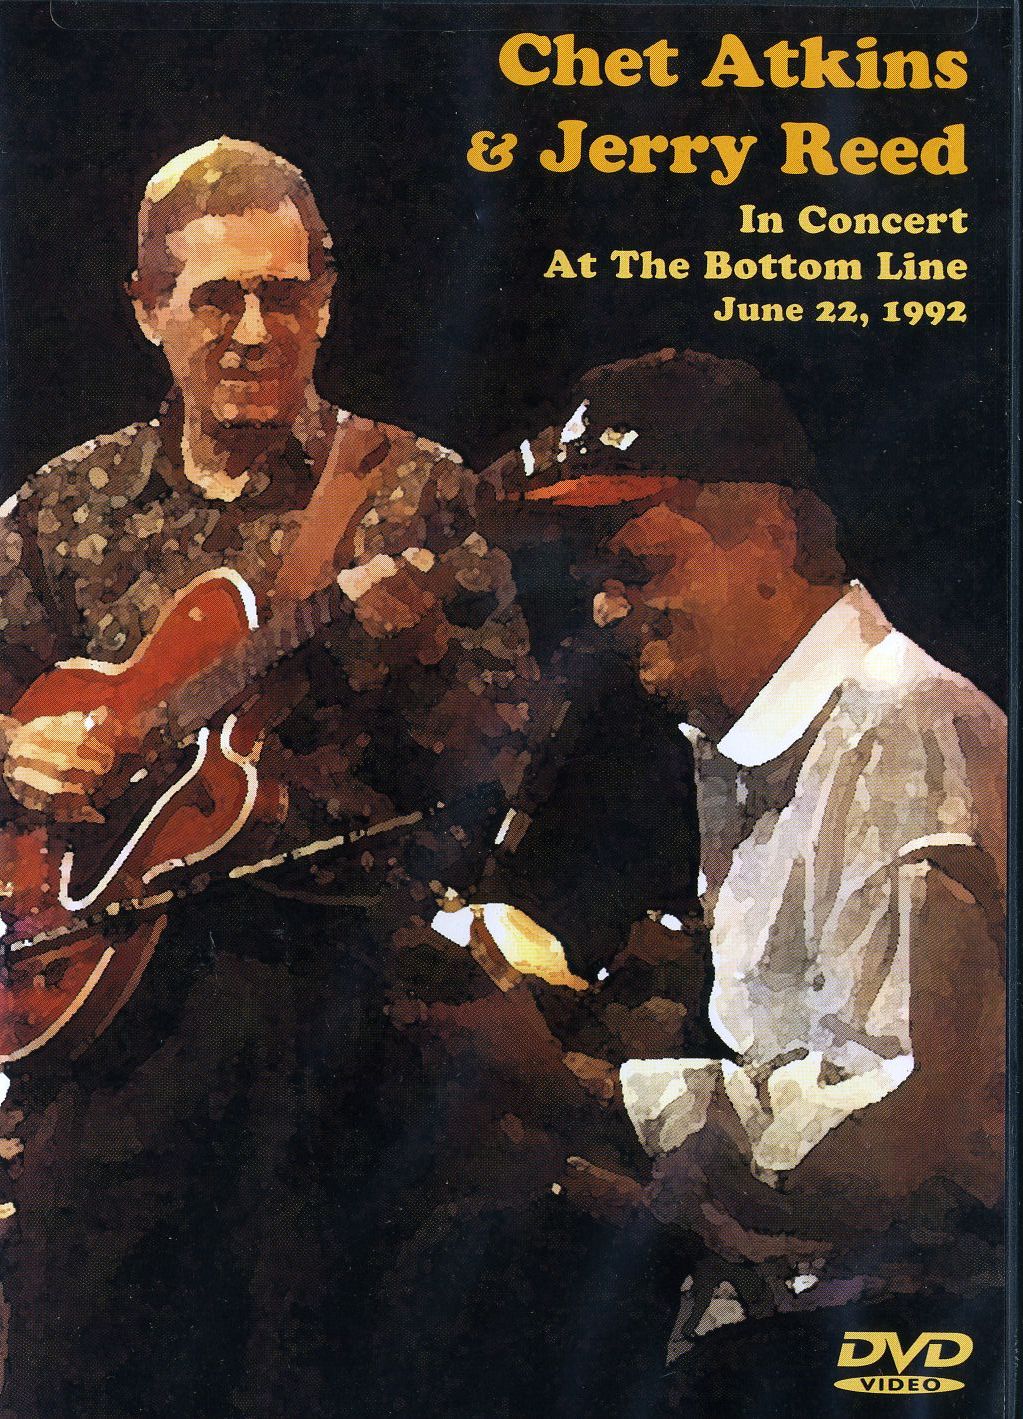 CHET ATKINS & JERRY REED